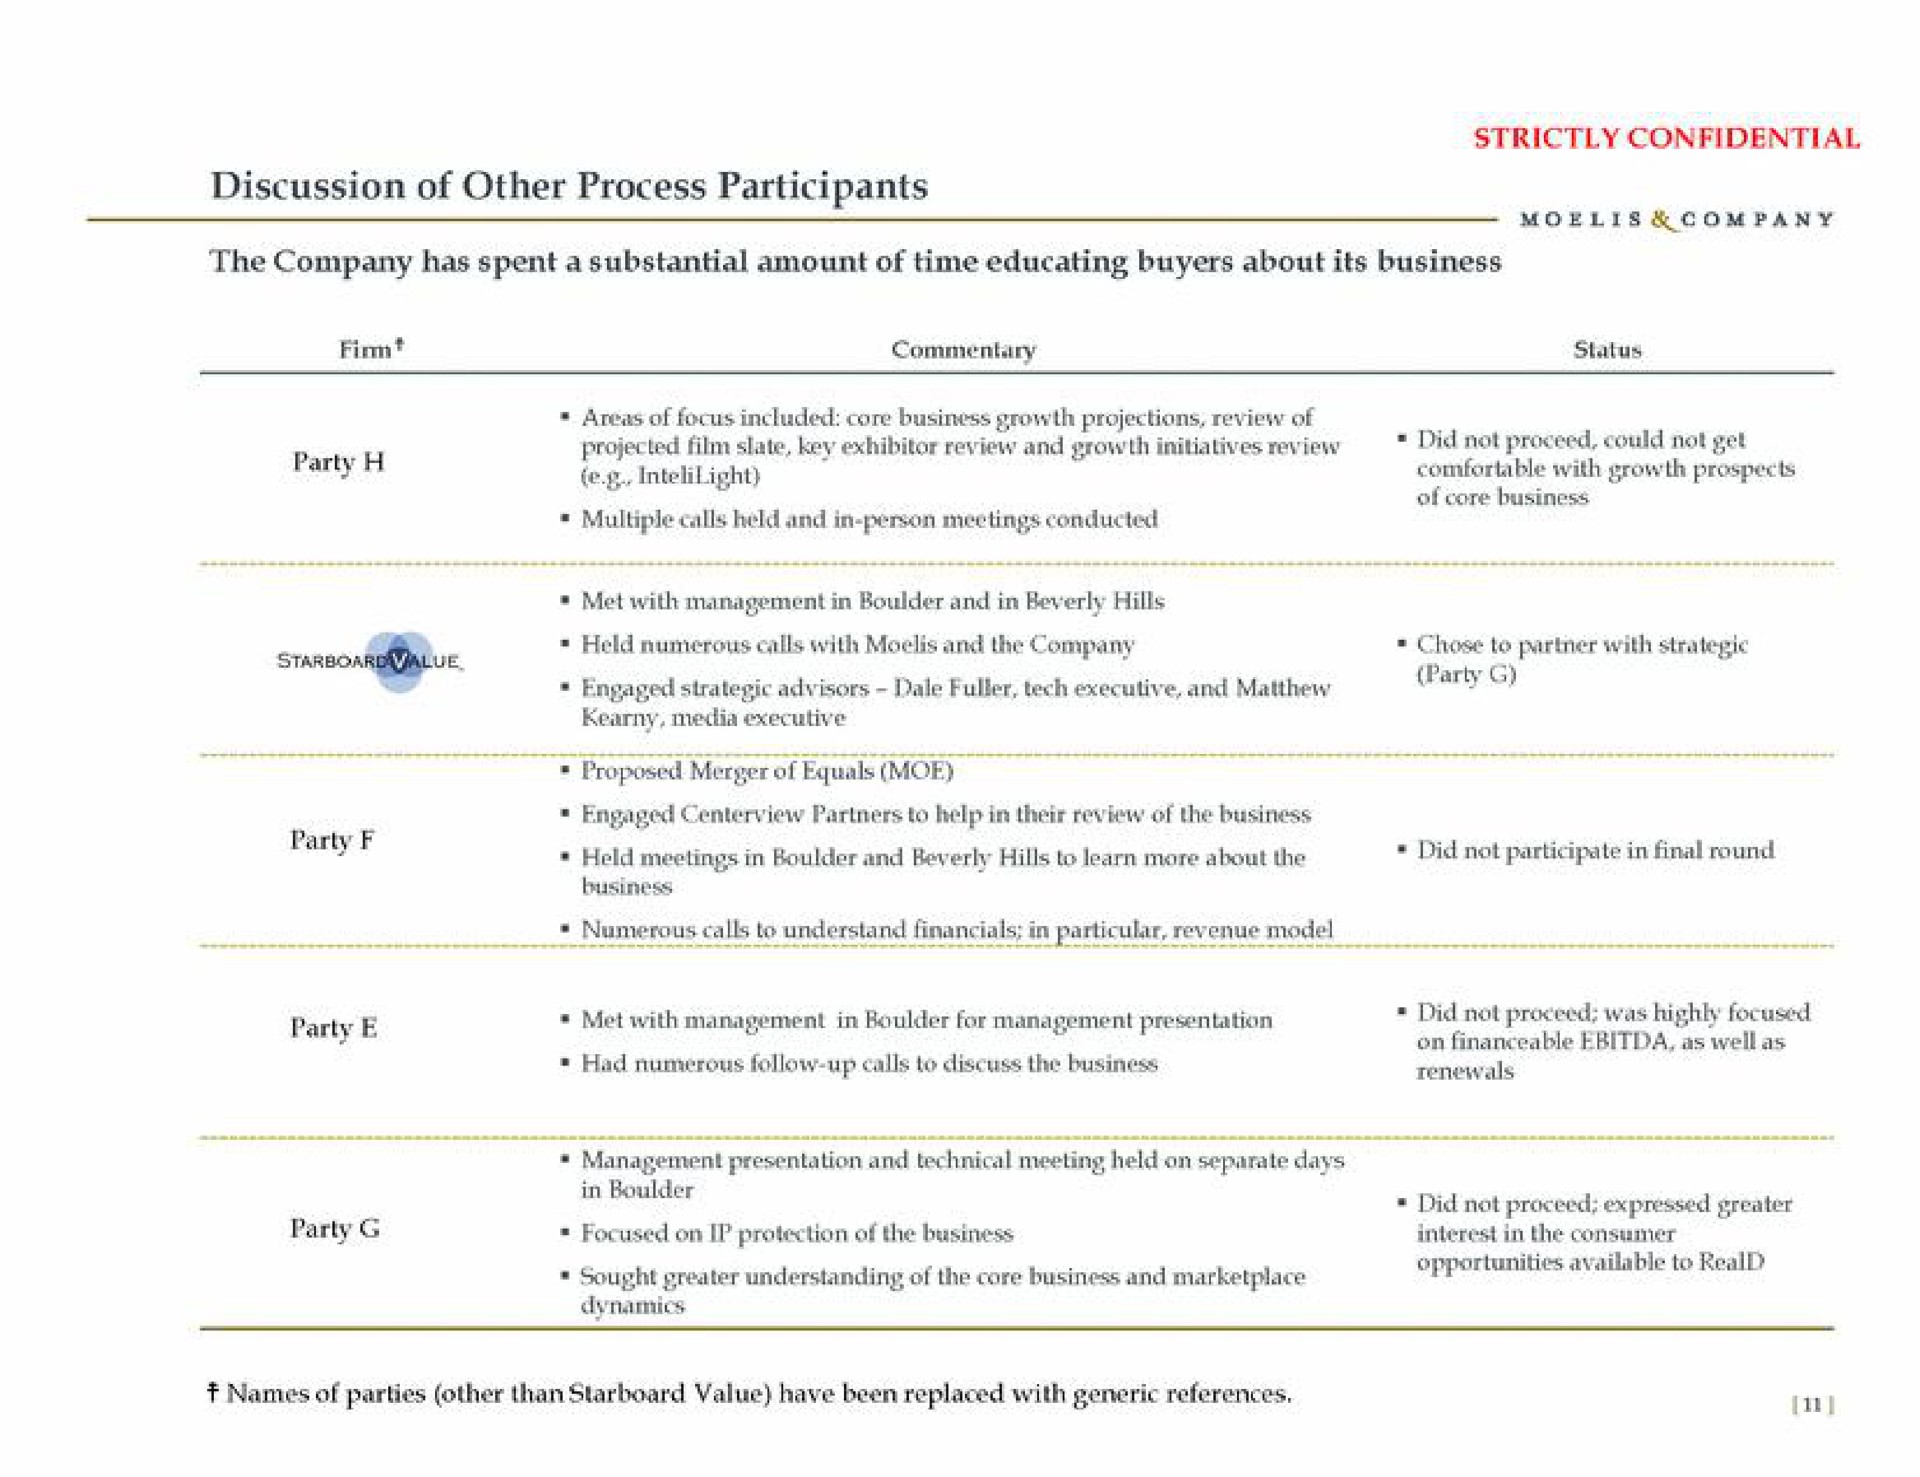 discussion of other process participants | Moelis & Company